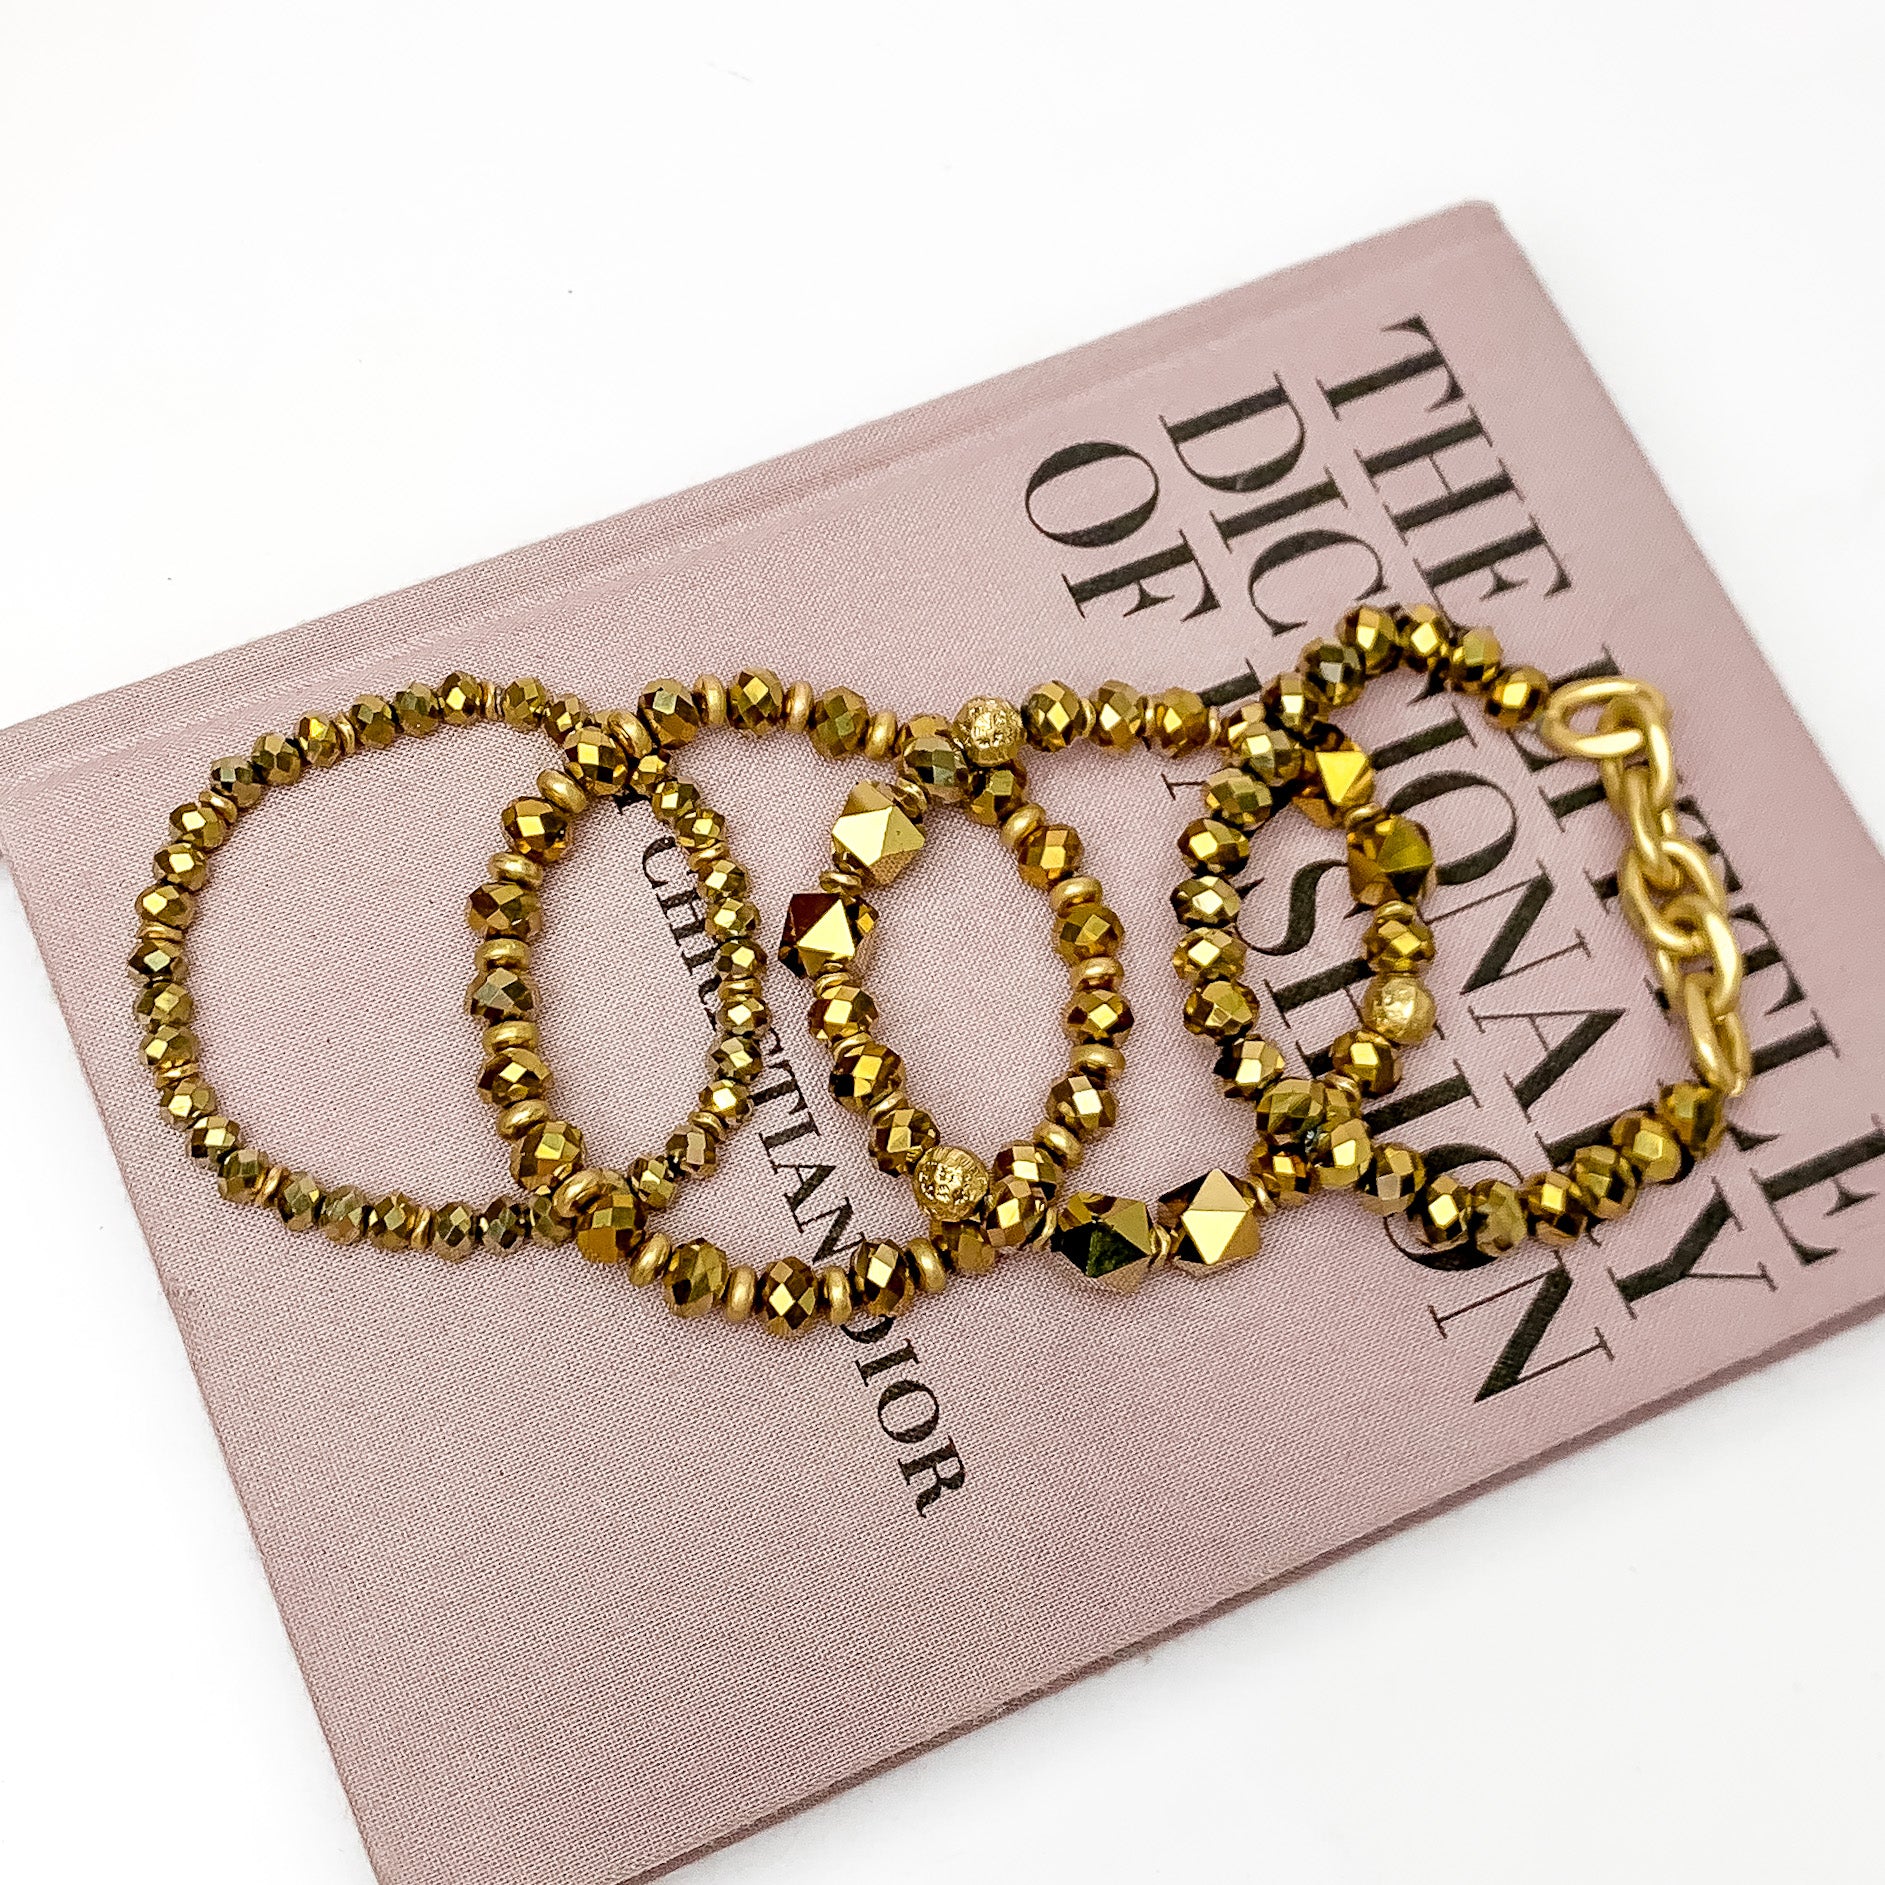 Set of Four | Glorious Gold Crystal Beaded Bracelet Set in Gold. Pictured laying on a closed book. The book is on a white background.